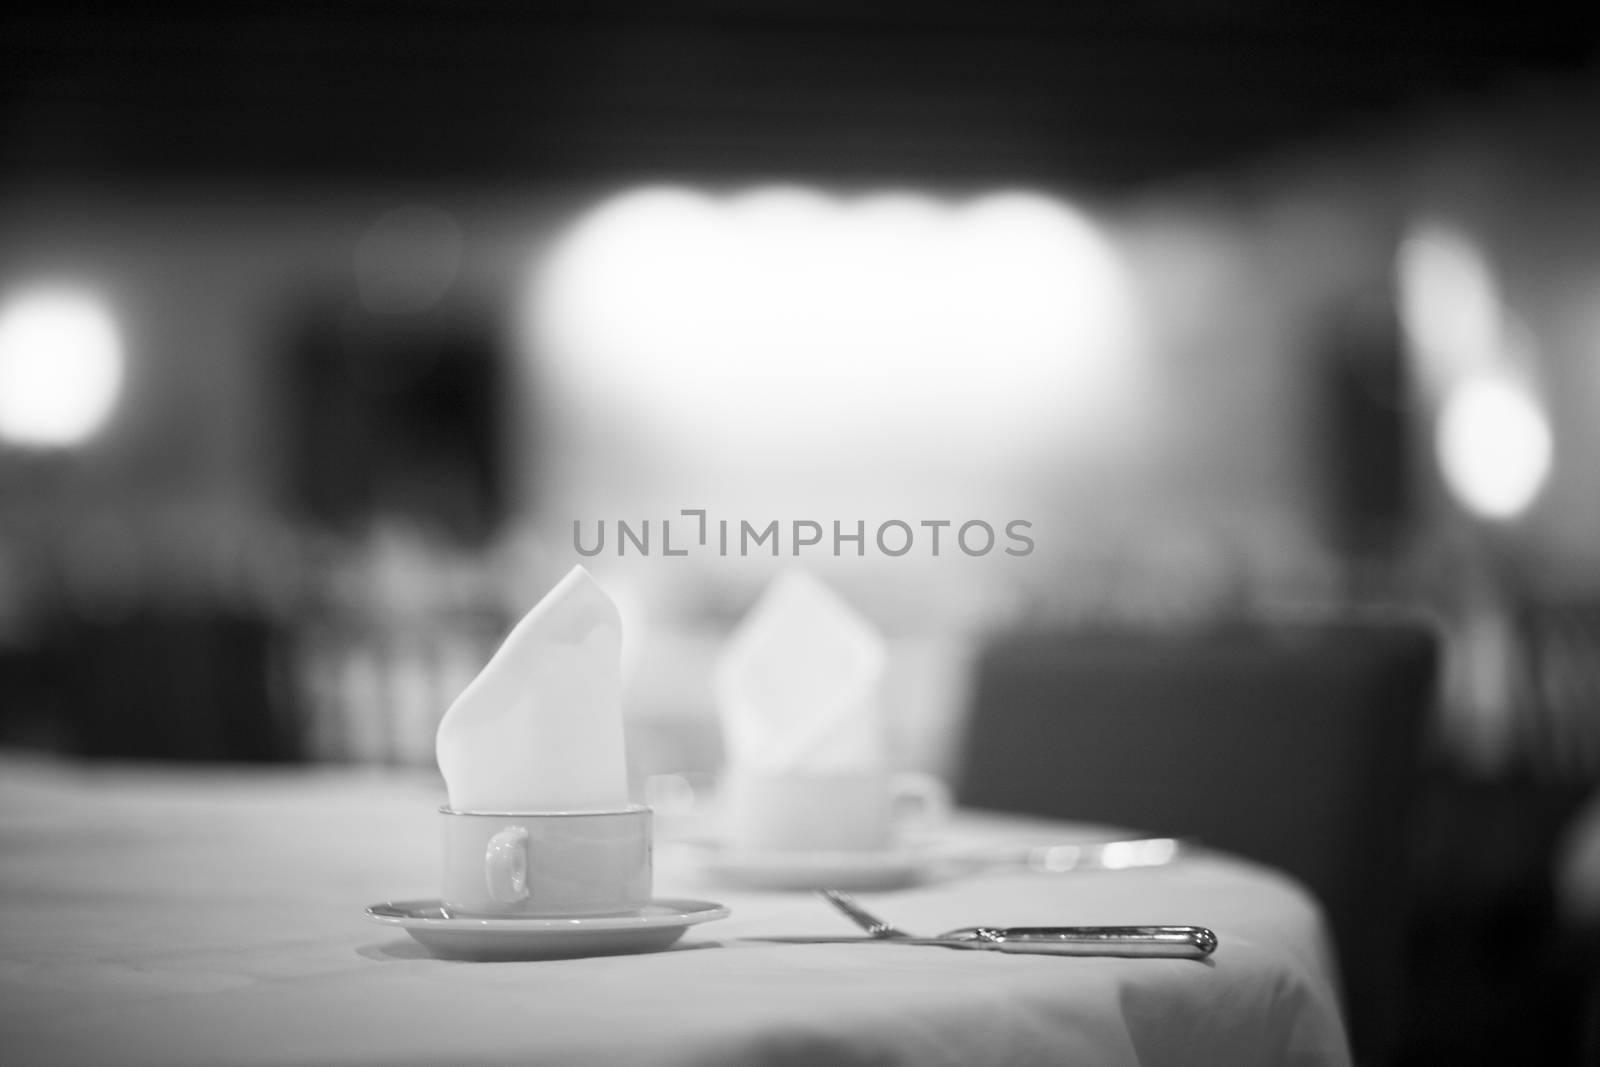 Coffee tea cup on wedding marriage reception table by edwardolive